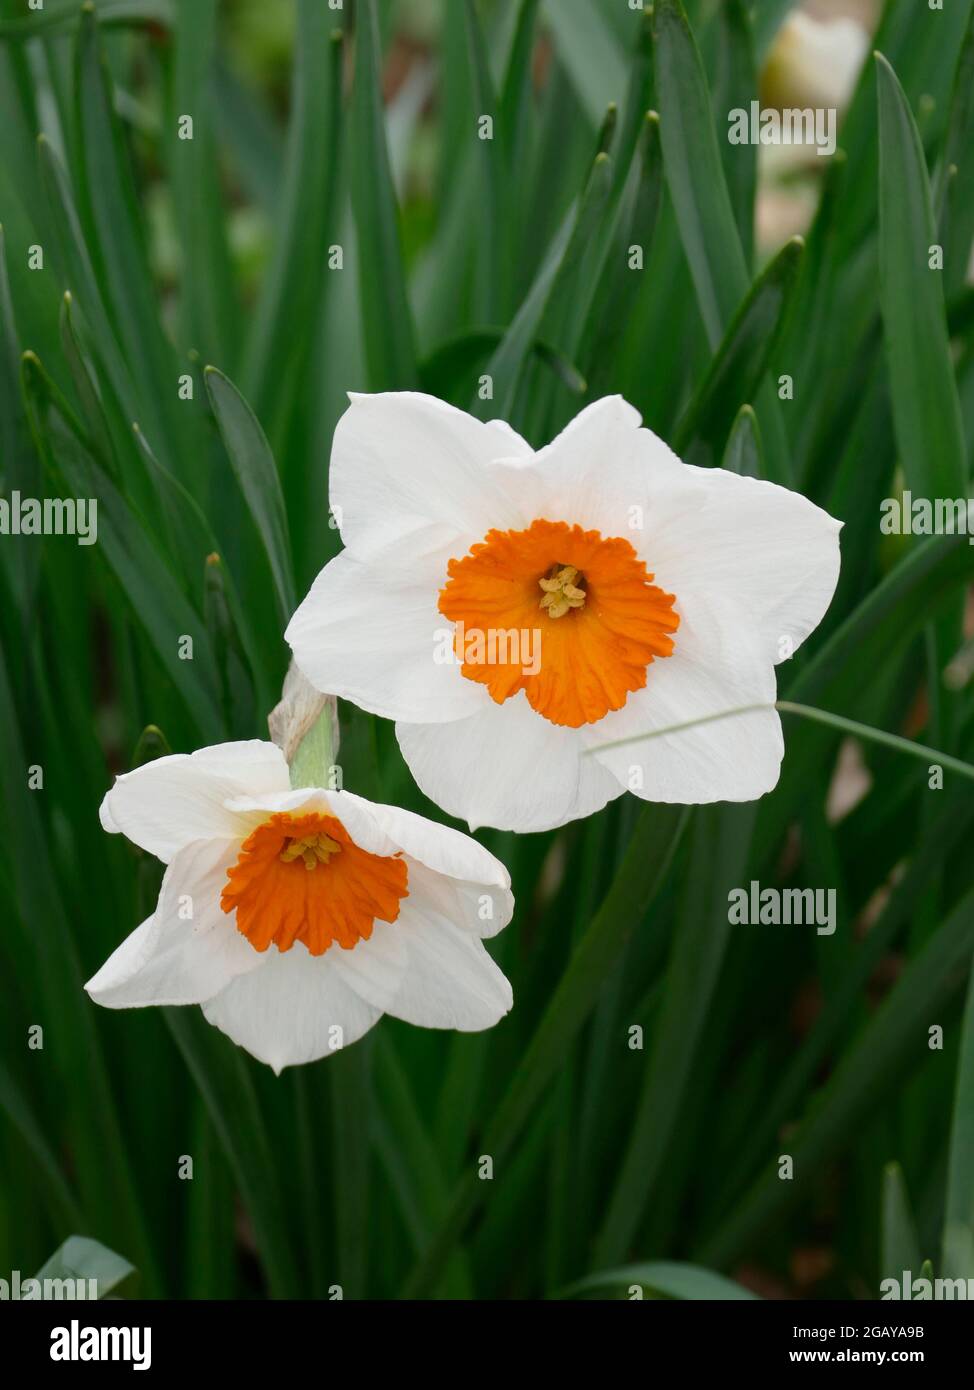 Small cupped daffodils or narcissus flowers with white petals and orange corona center with green foliage in the background Stock Photo